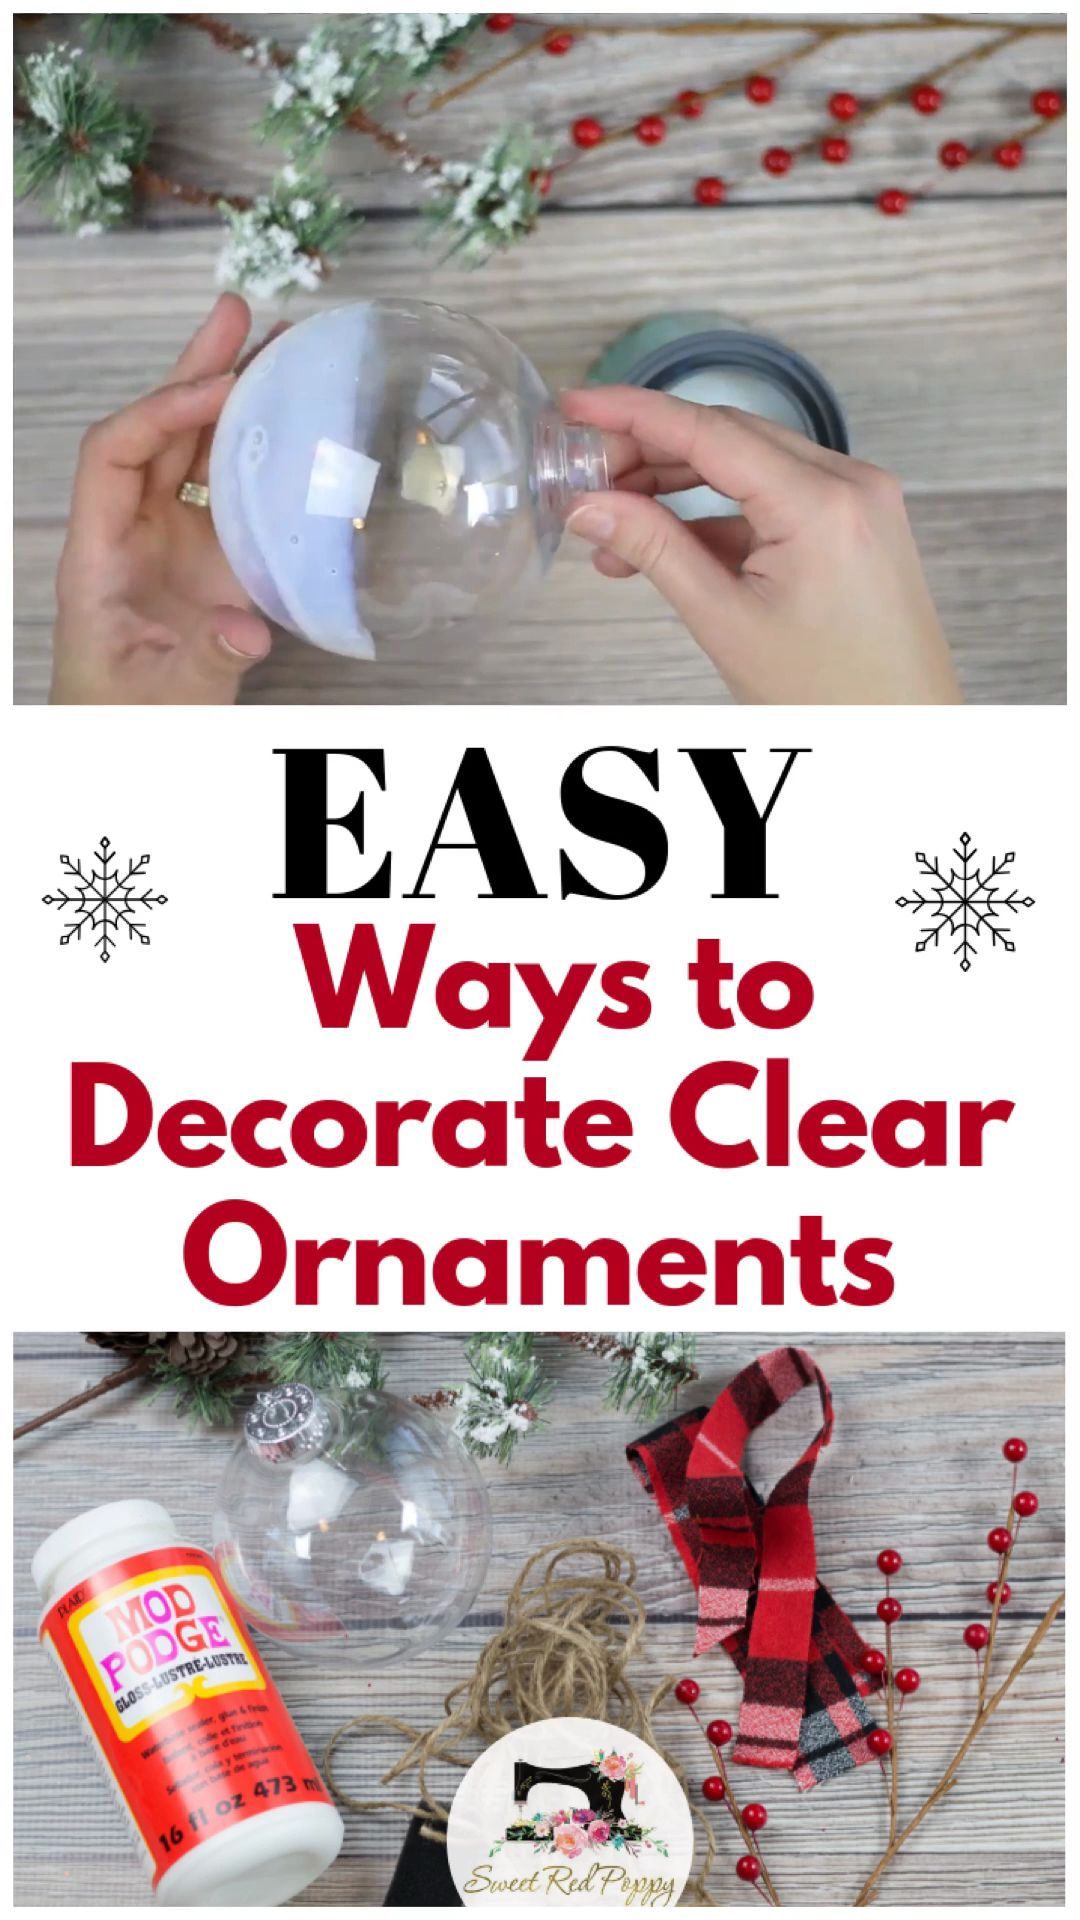 Easy Ways to Decorate Clear Plastic Ornaments for Christmas - Sweet Red Poppy - Easy Ways to Decorate Clear Plastic Ornaments for Christmas - Sweet Red Poppy -   17 diy Christmas mason jars ideas